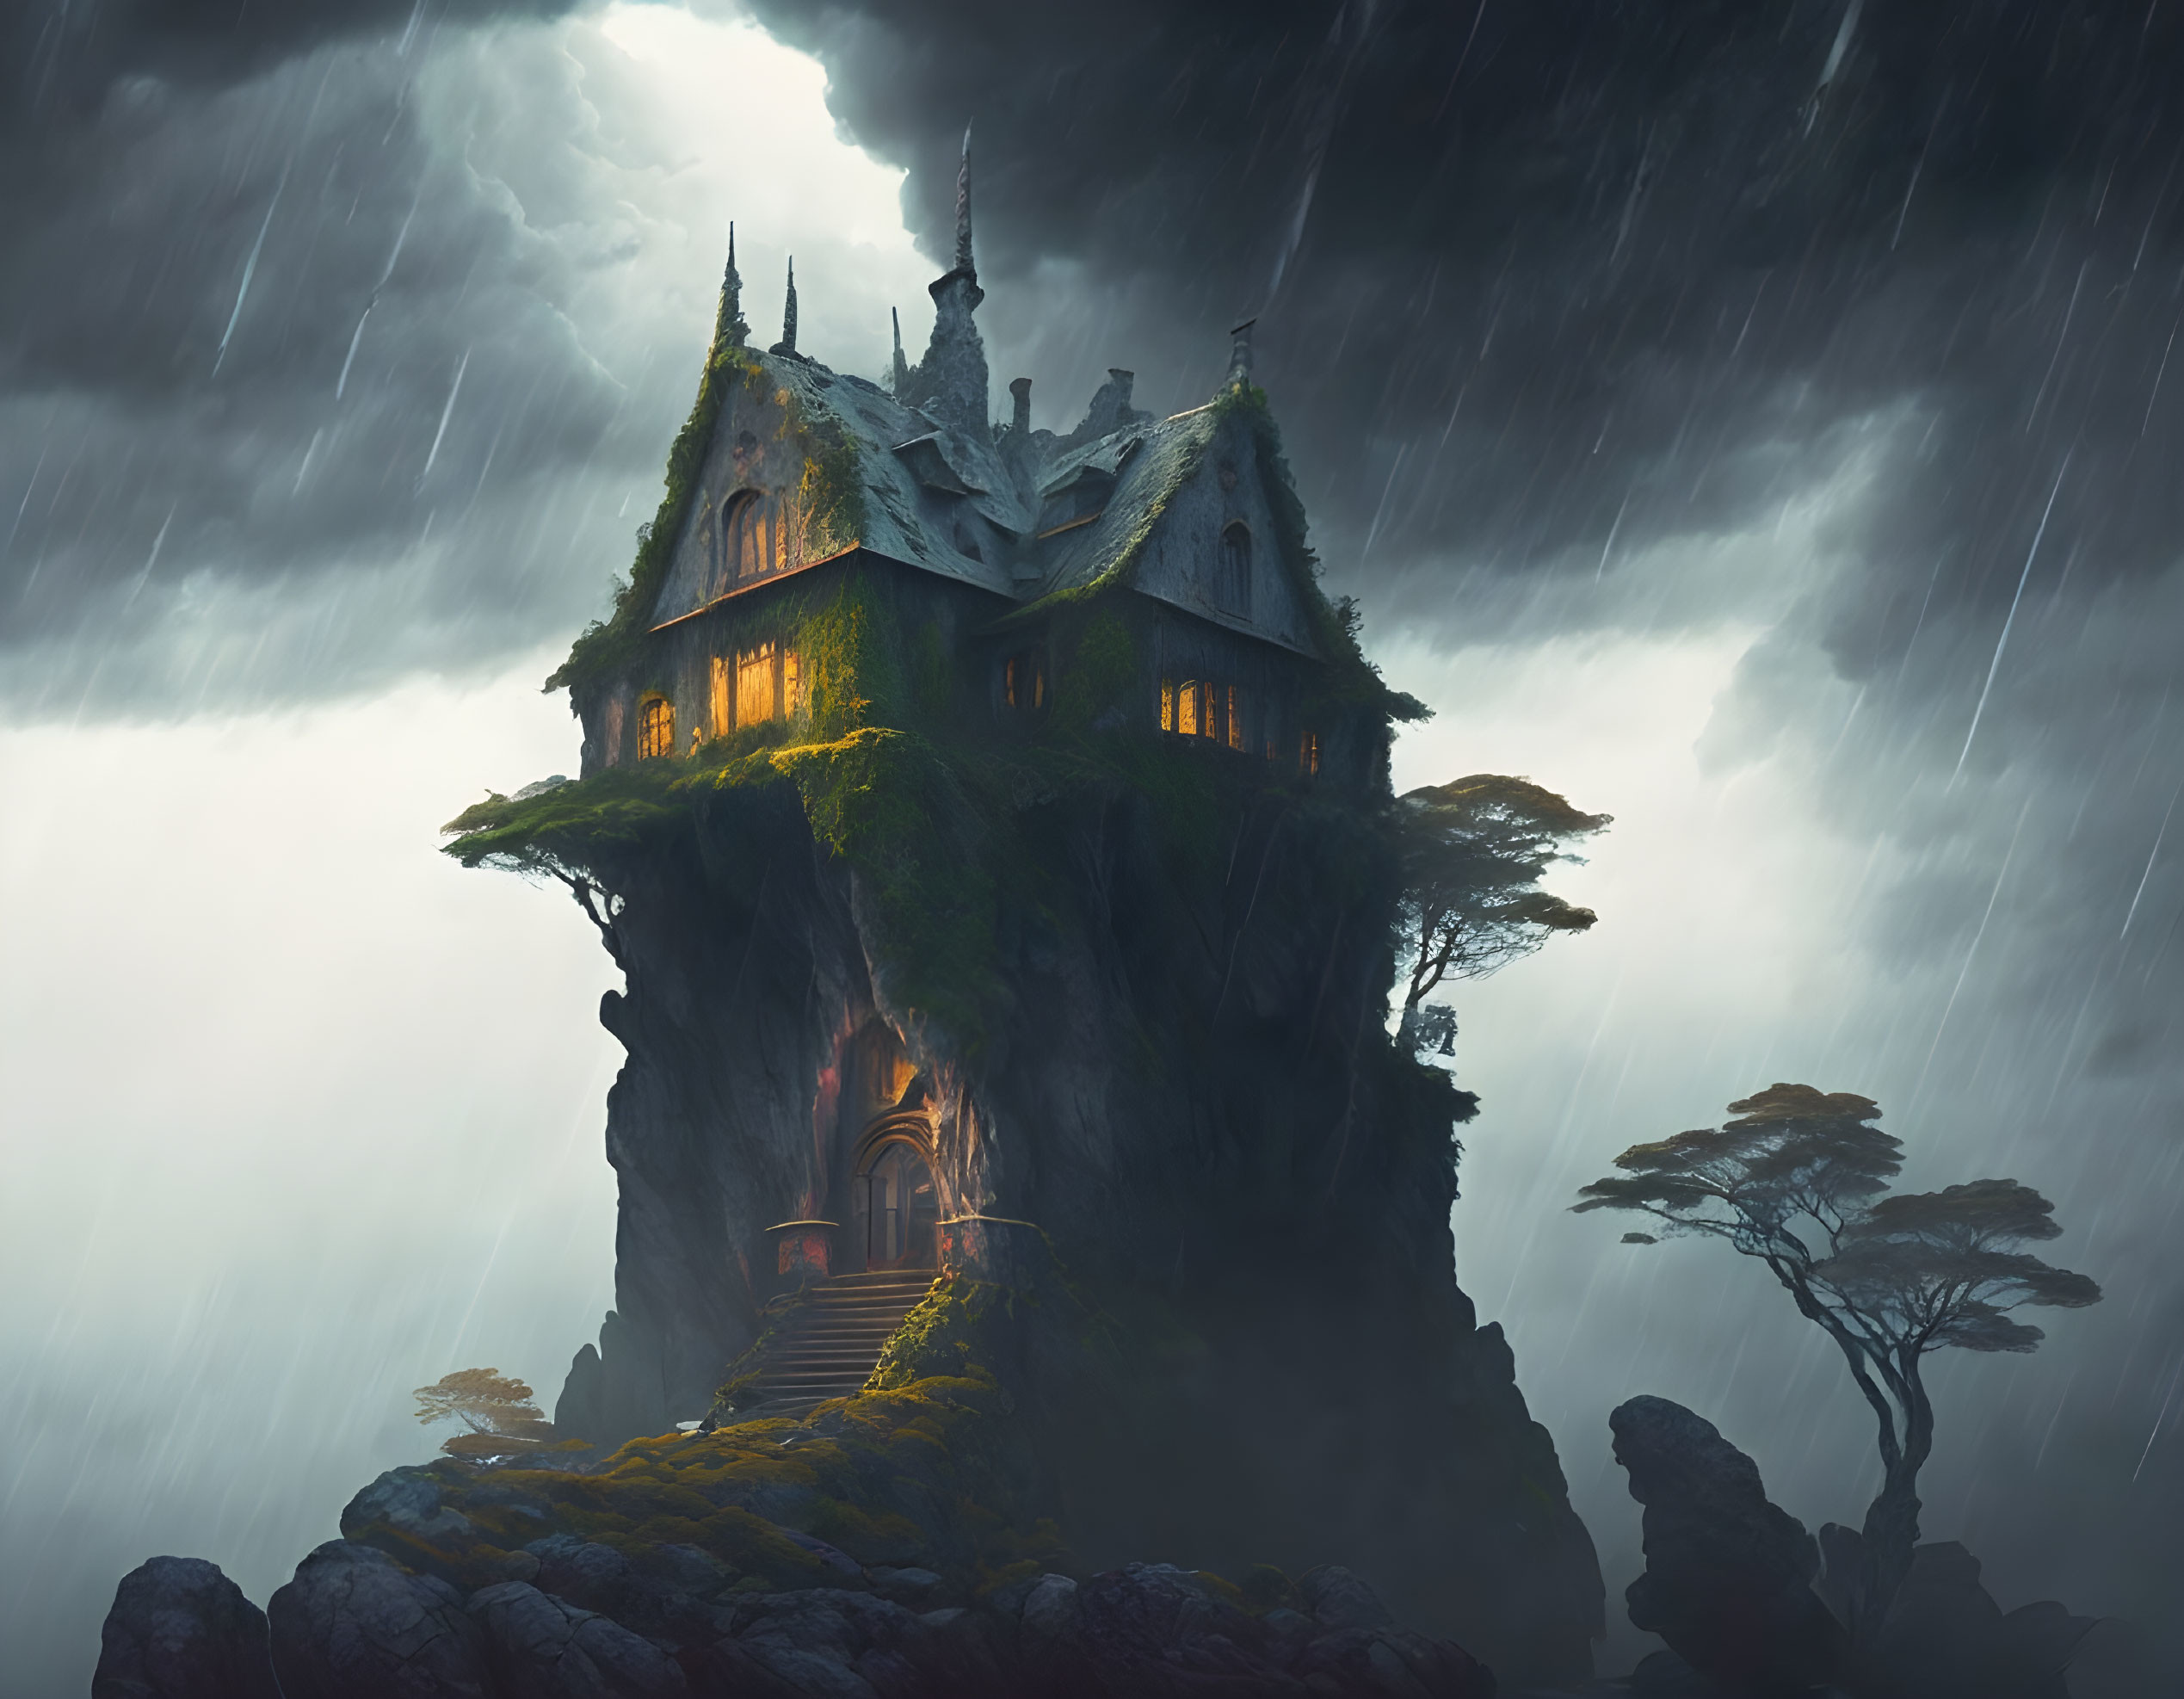 House on a cliff, in a Thunderstorm